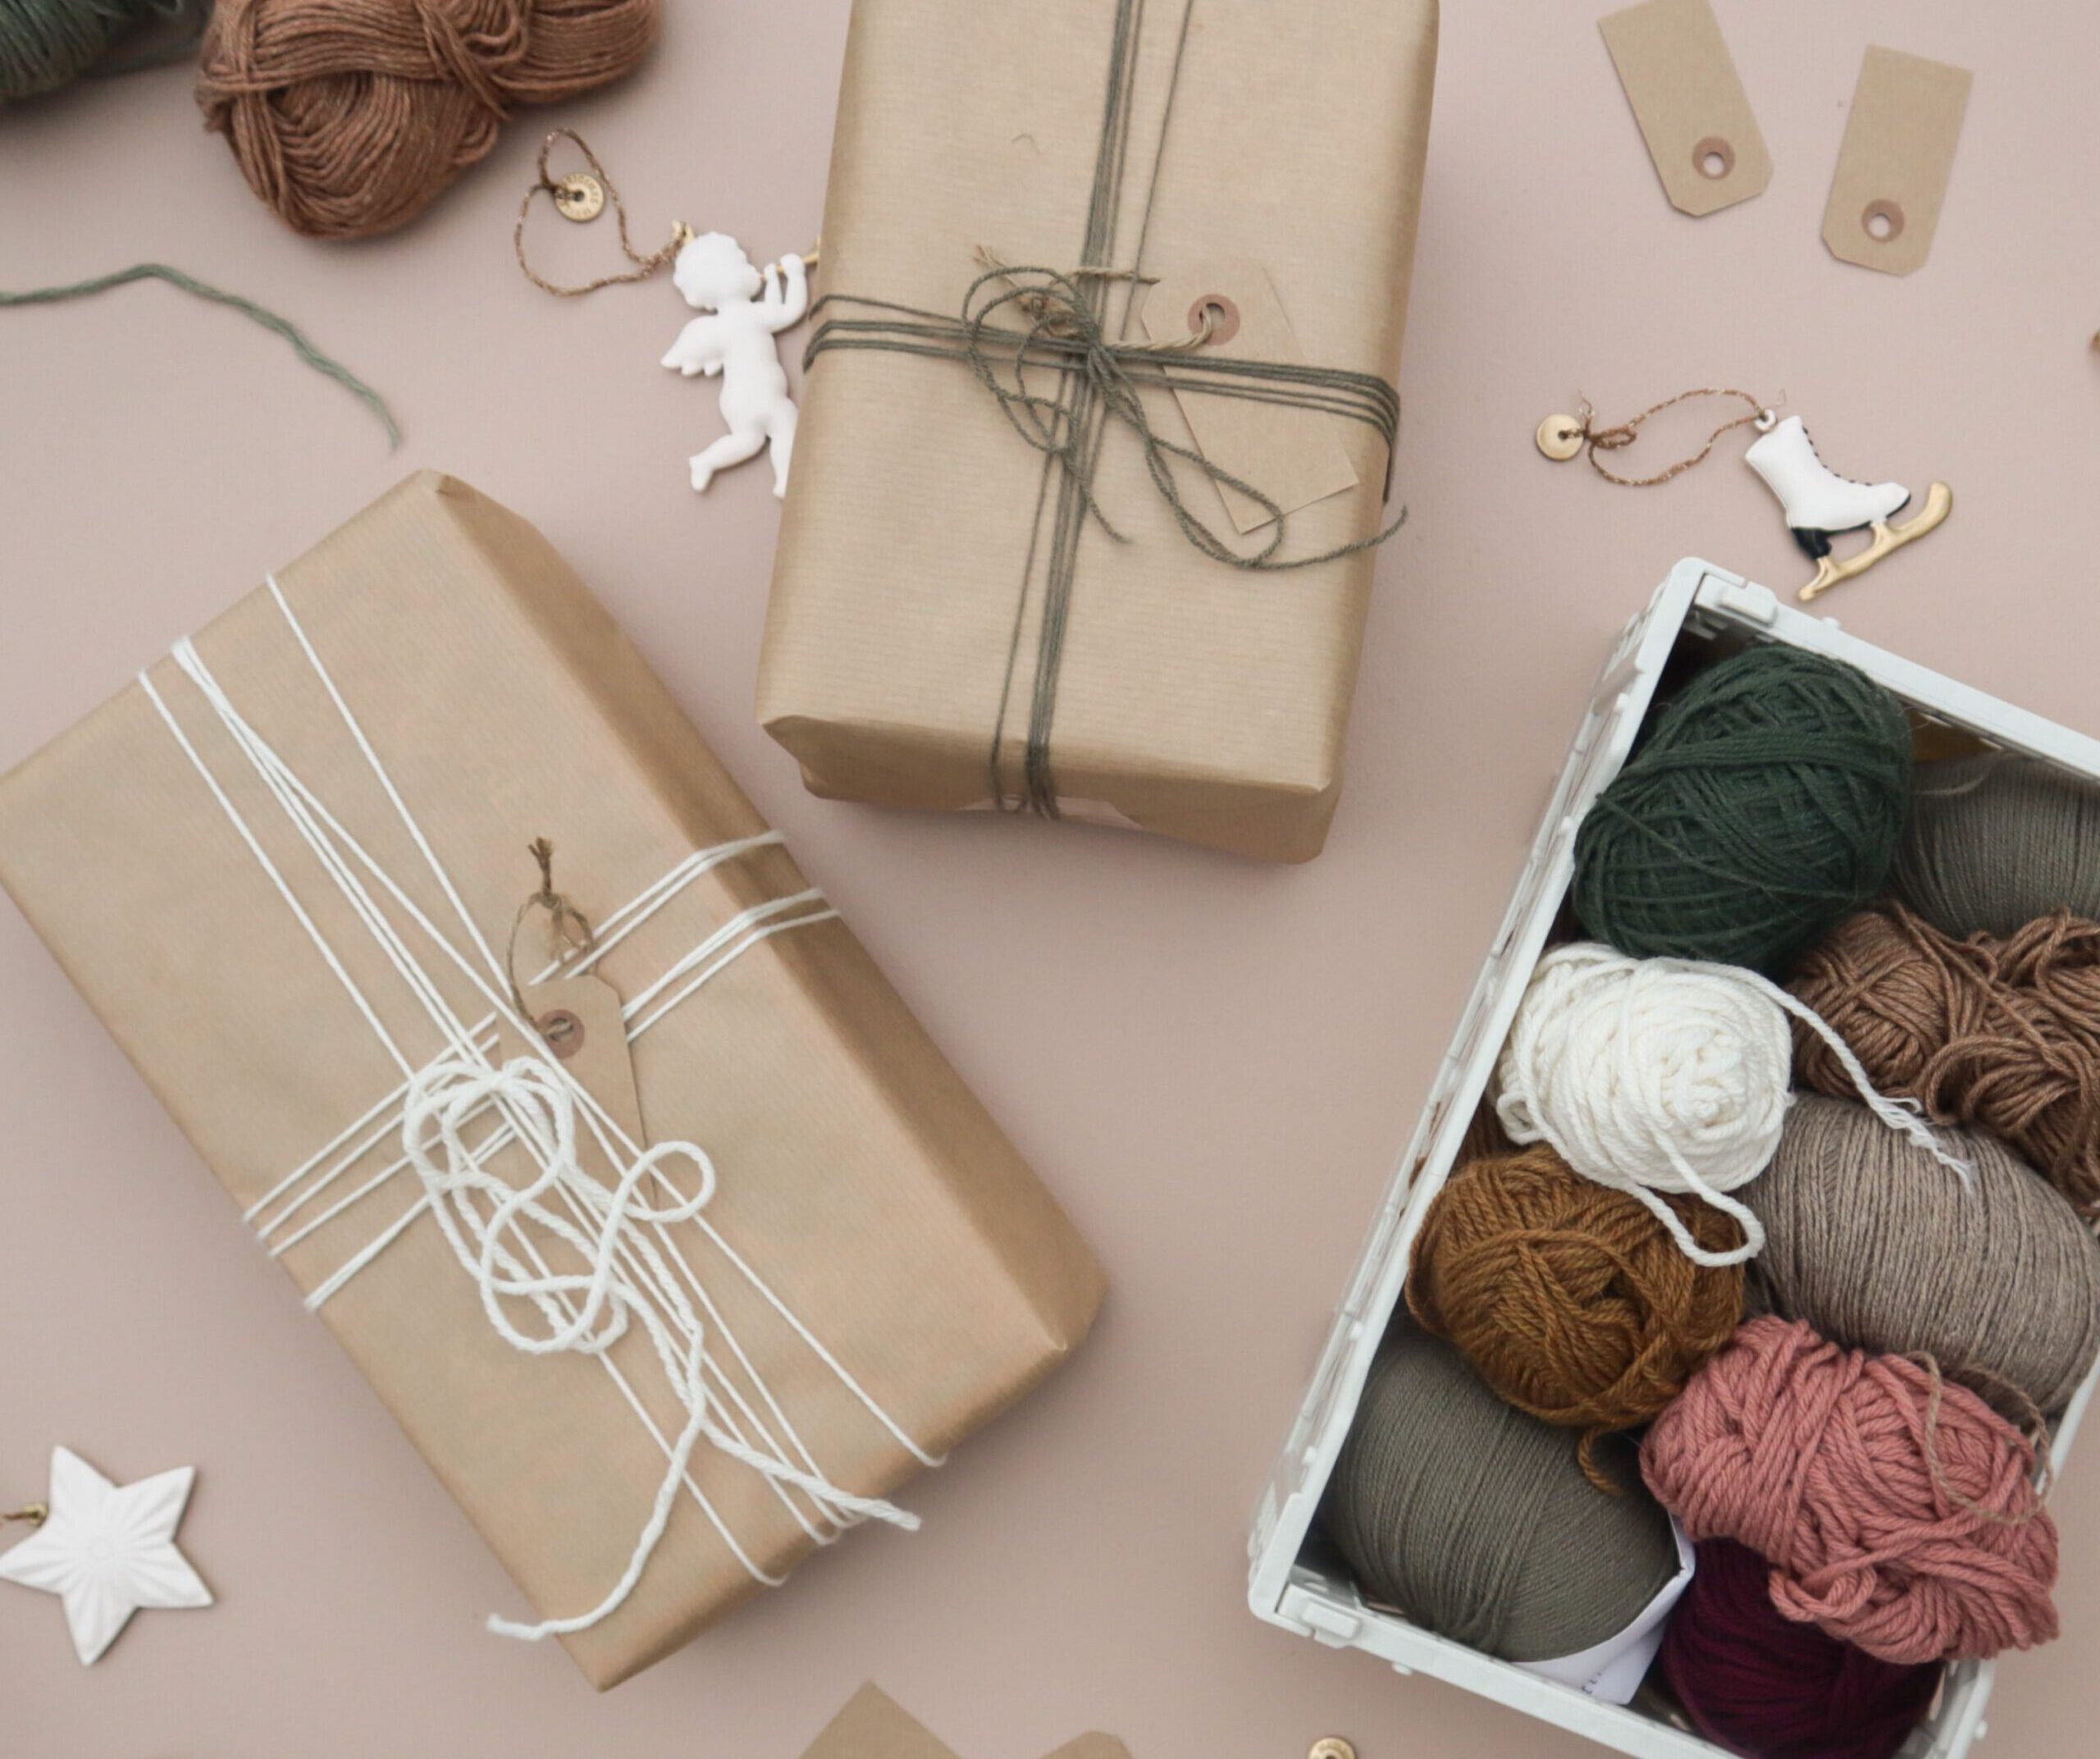 How to gift wrap with yarn scraps